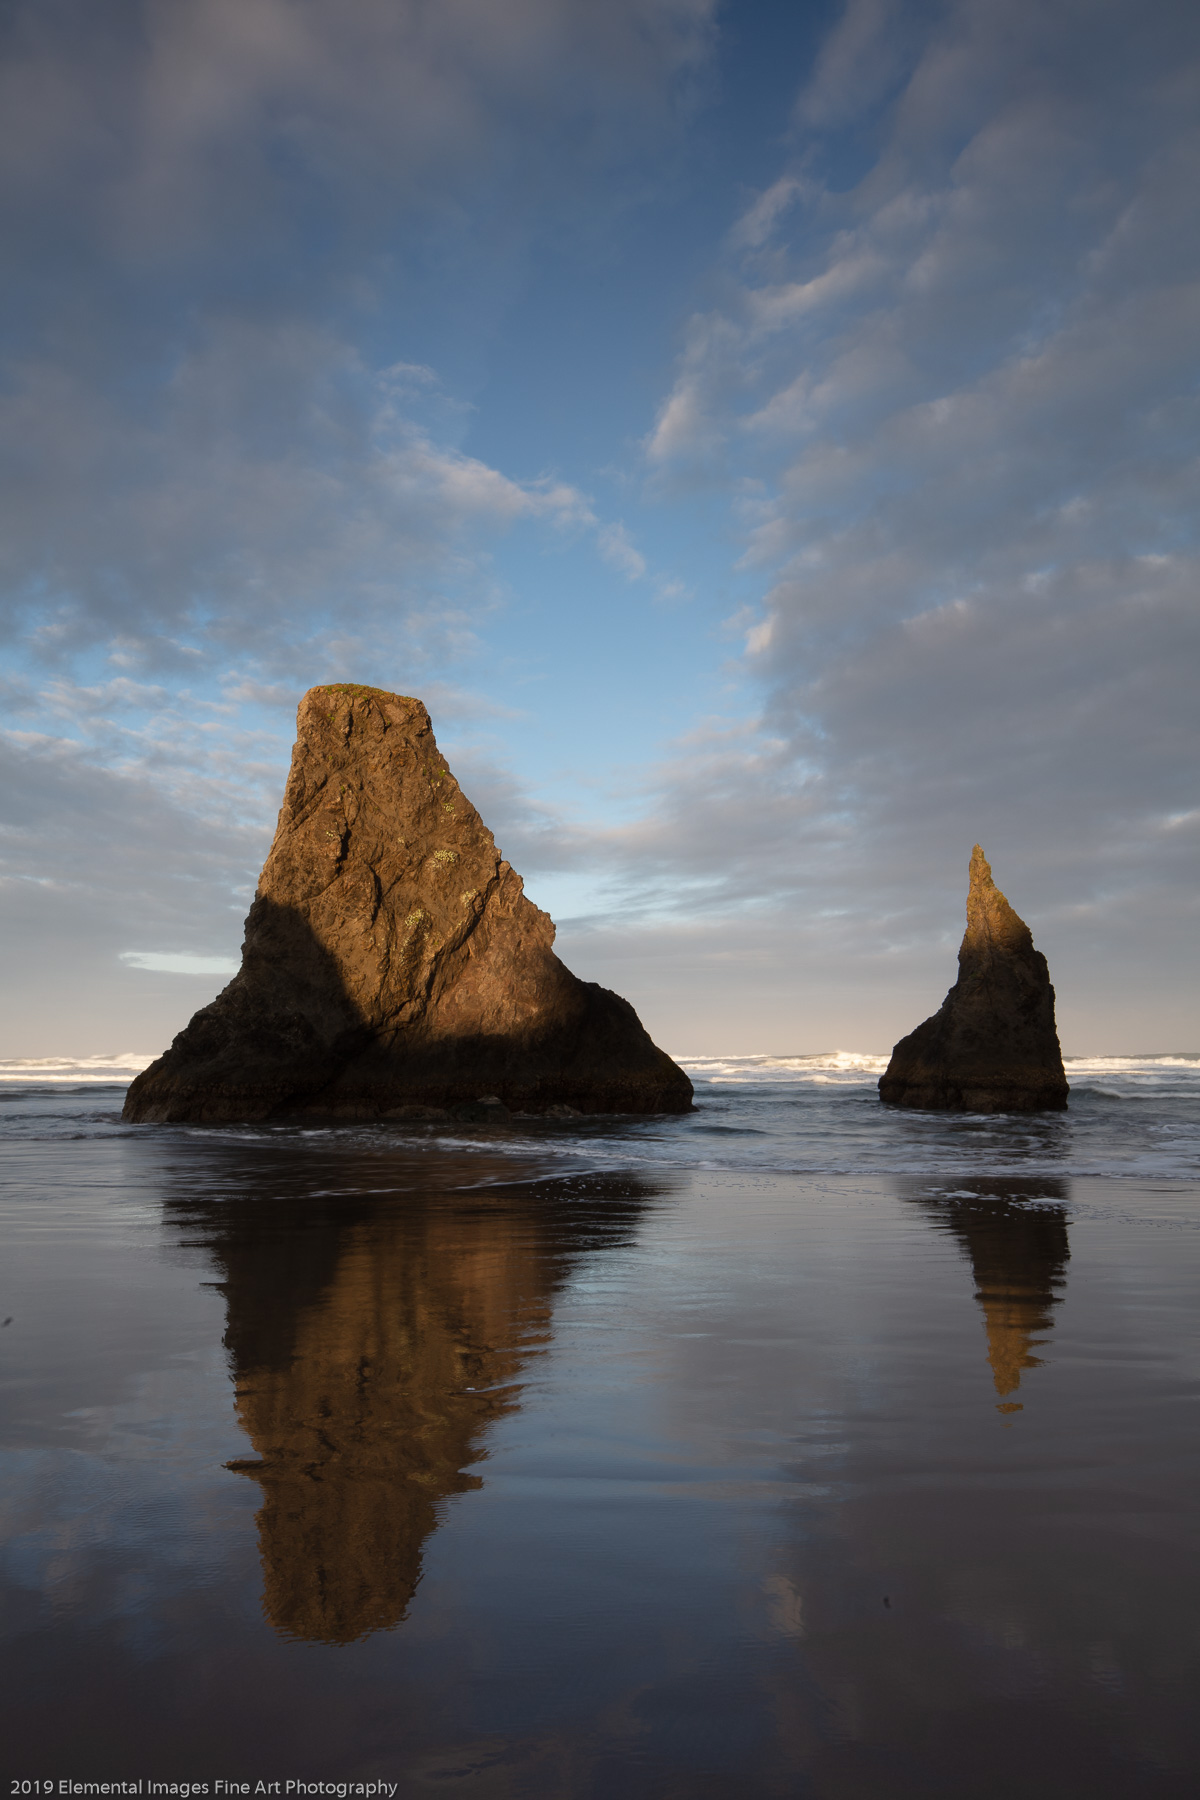 Stack at Dawn | Bandon | OR | USA - © 2019 Elemental Images Fine Art Photography - All Rights Reserved Worldwide